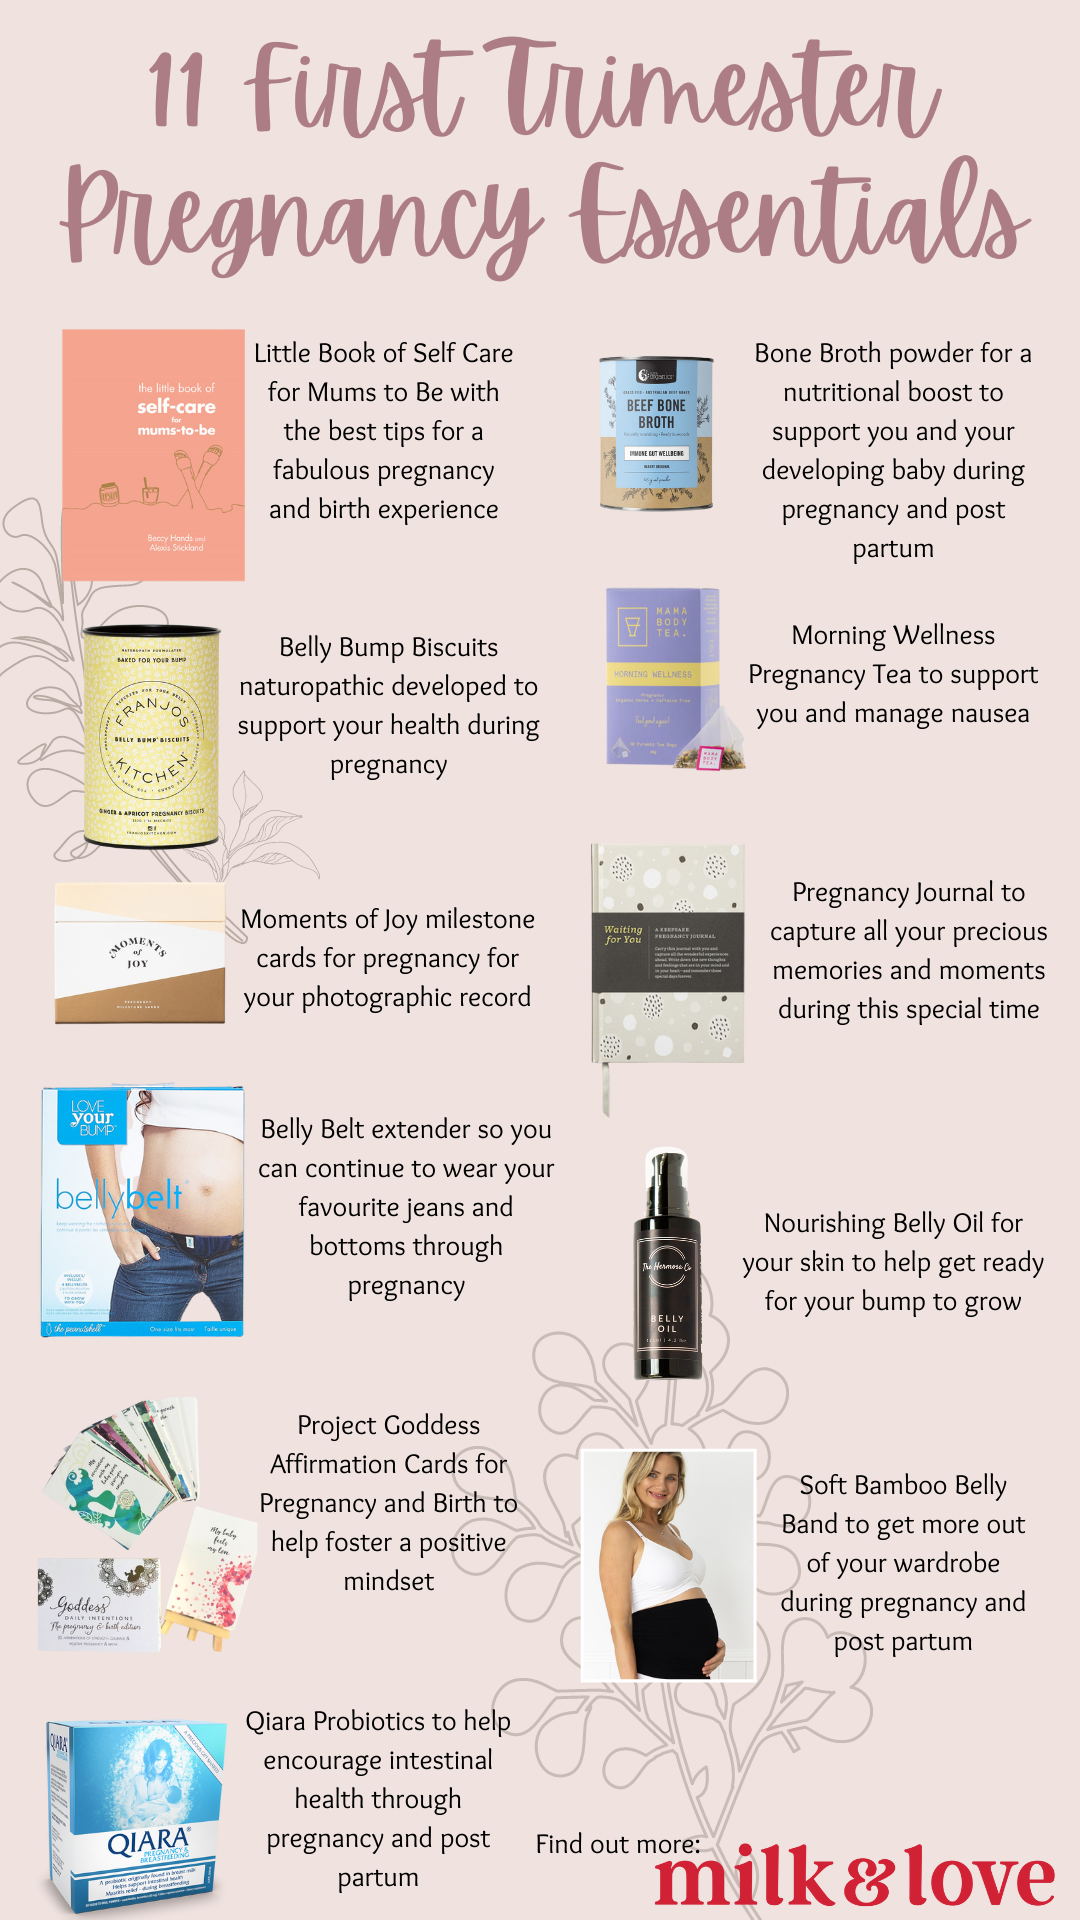 10 Second Trimester Must-Haves for Your Pregnancy - Baby Chick